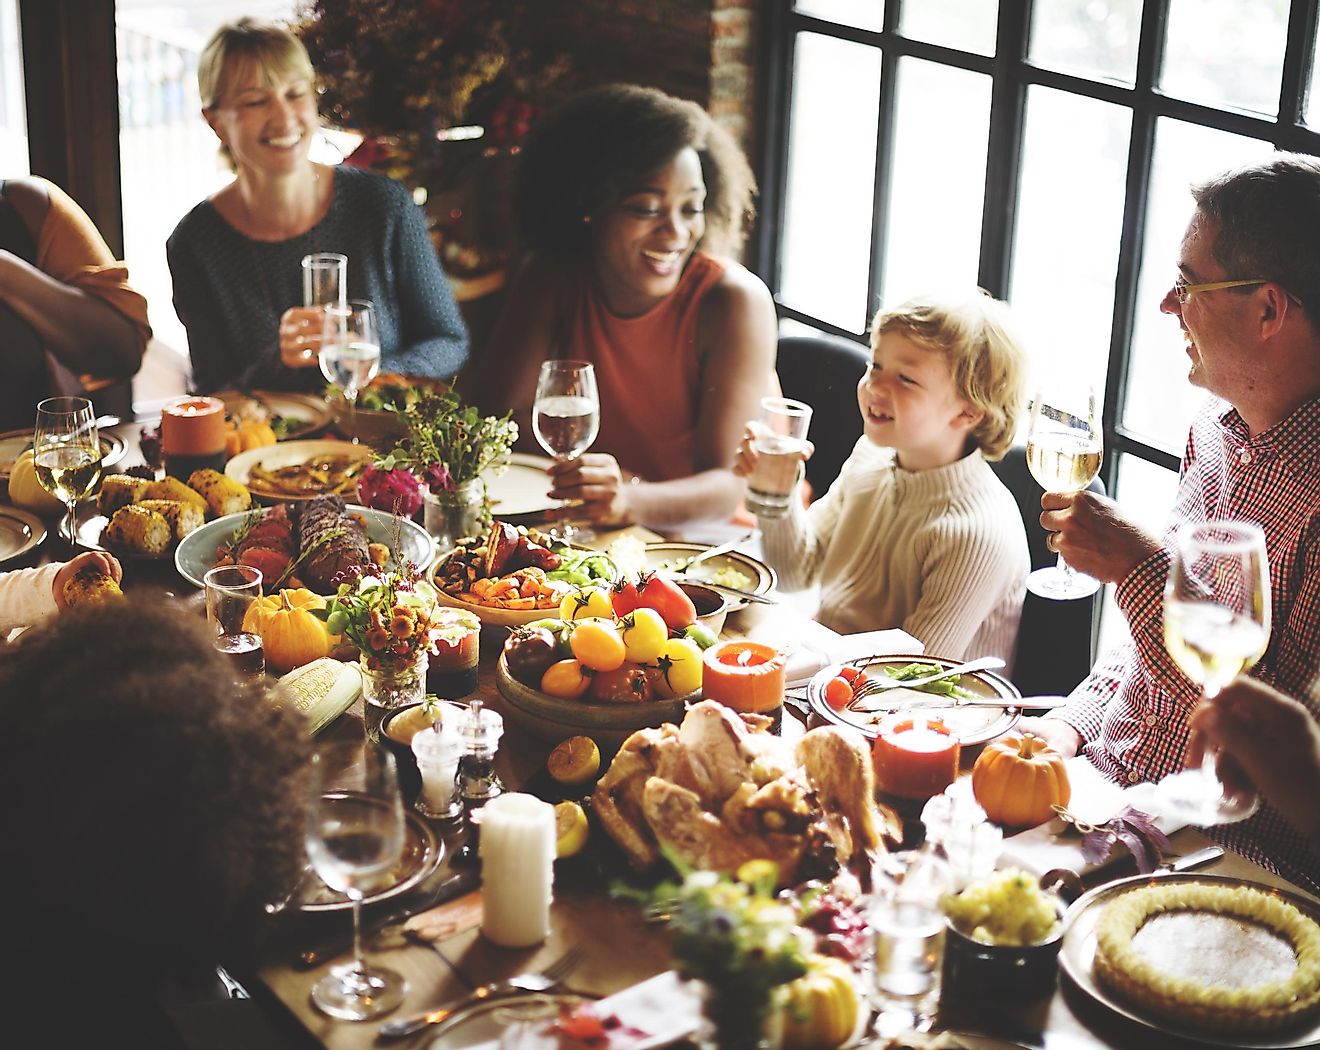 A modern-day American family celebrating Thanksgiving with a sumptuous feast. Image credit: Rawpixel.com/Shutterstock.com